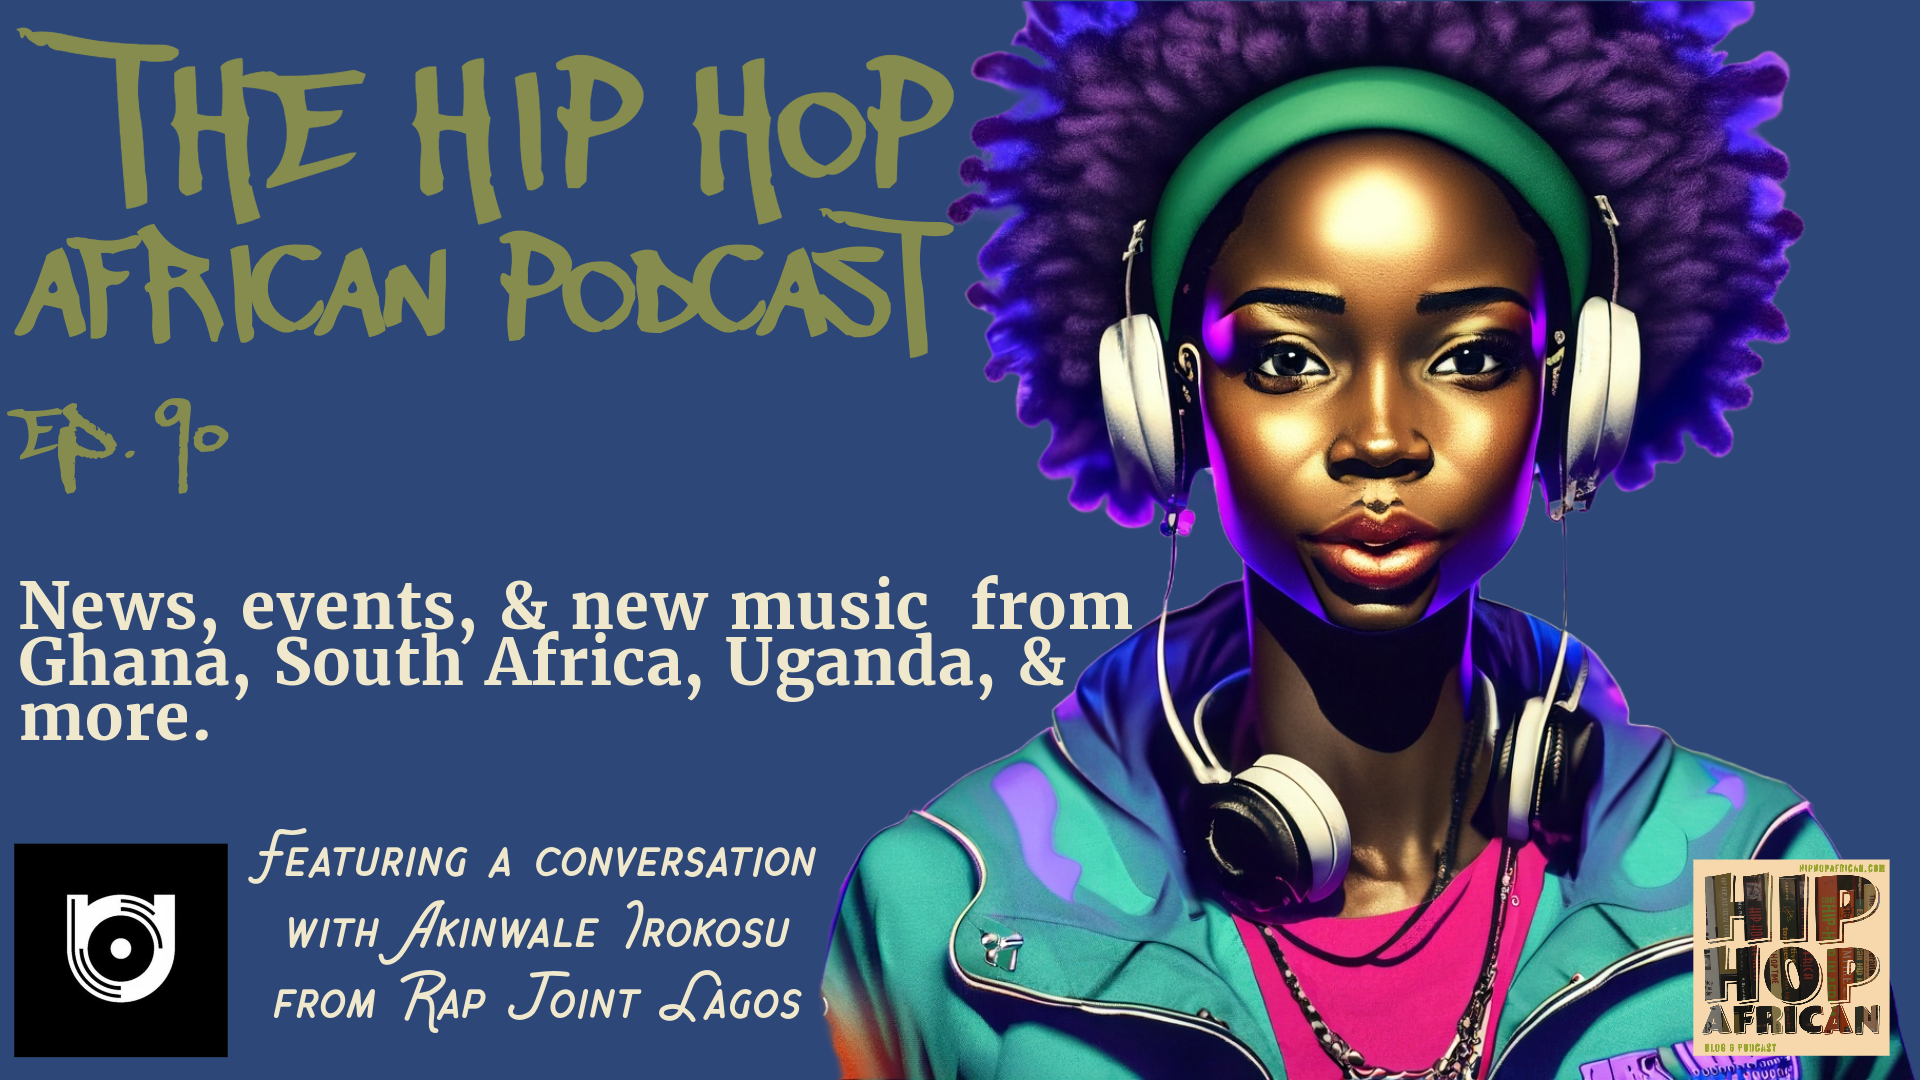 The Sound Of Accra Podcast